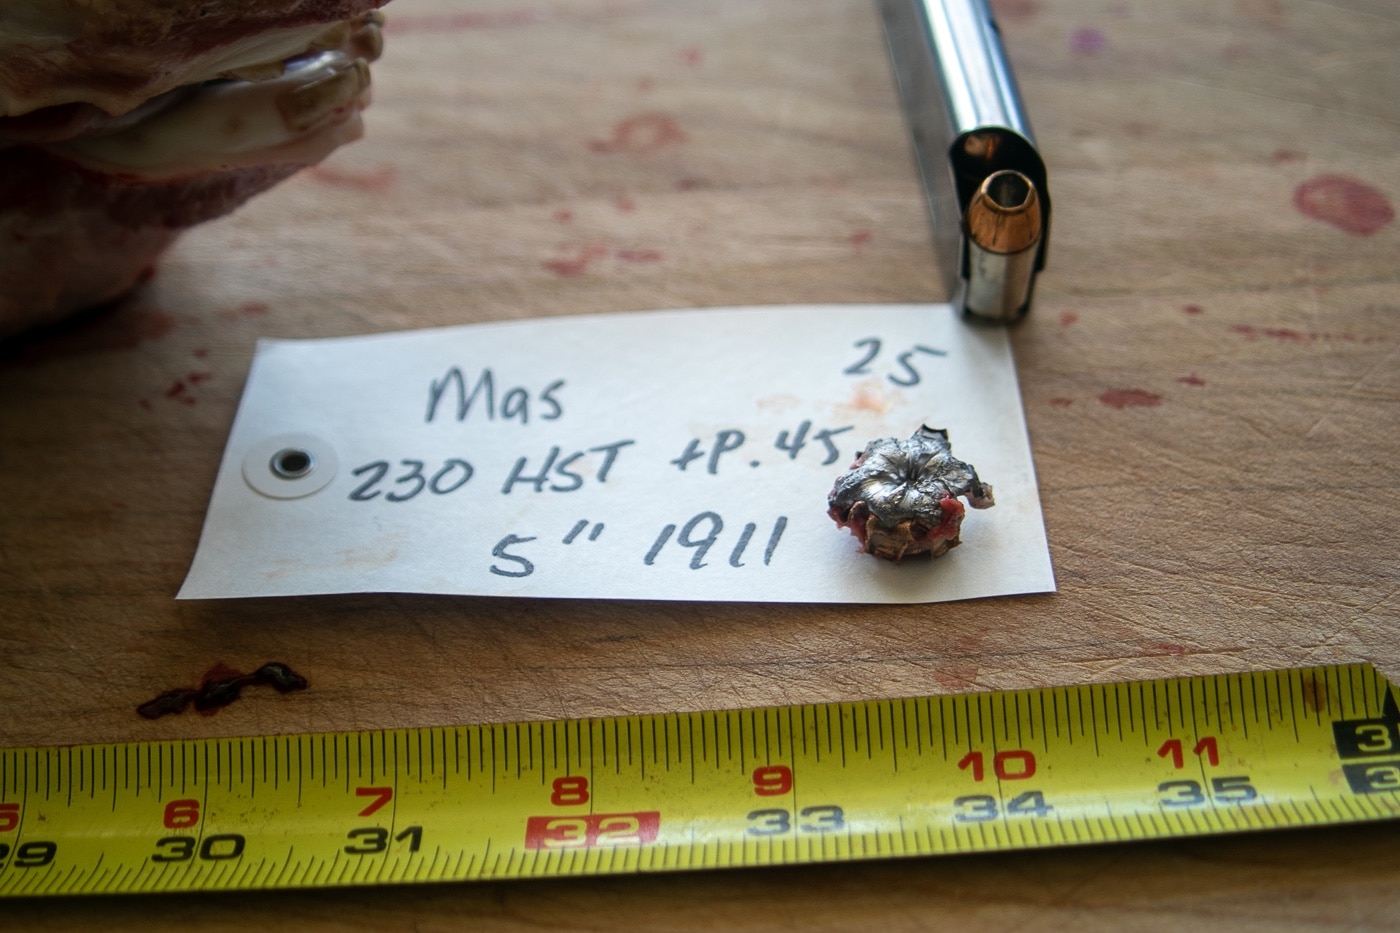 In this photograph, the author shows us a recovered .45 caliber expanded hollow point bullet that was used to harvest a wild pig during a hog hunt.